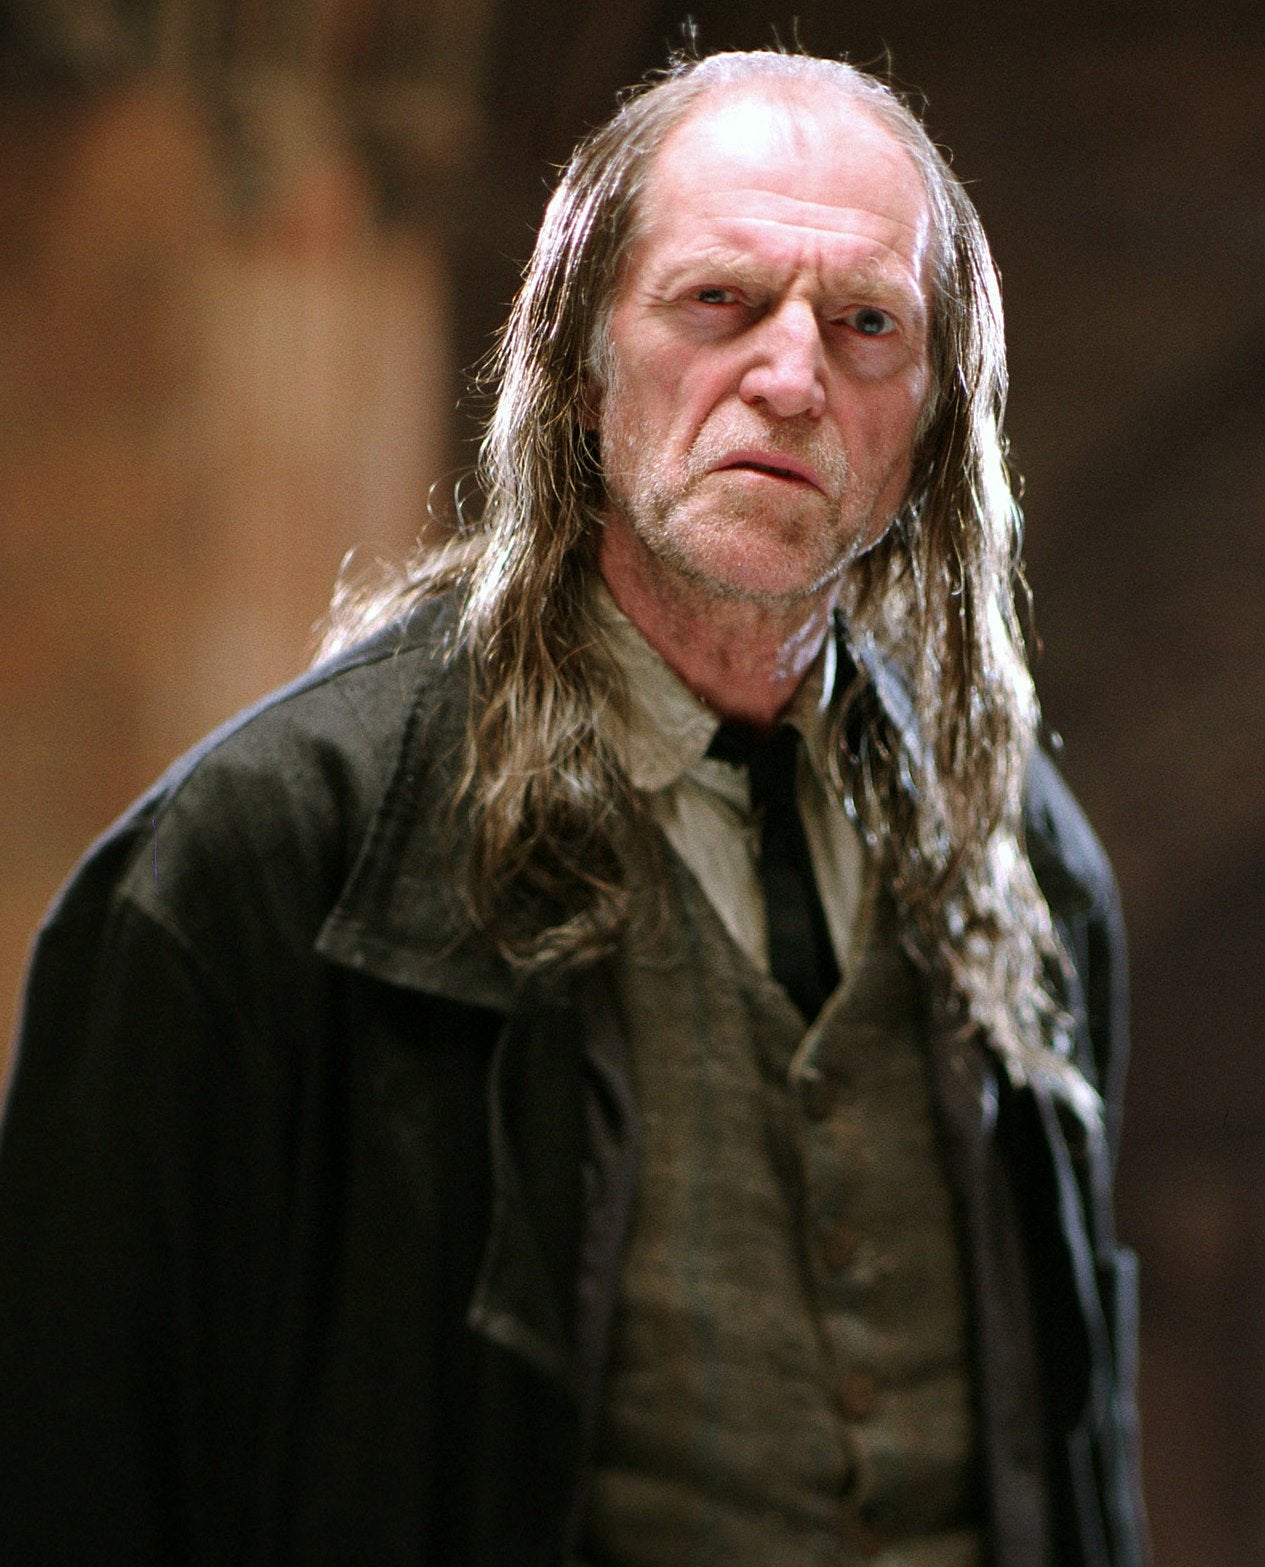 What are the characteristics of Argus Filch? 2